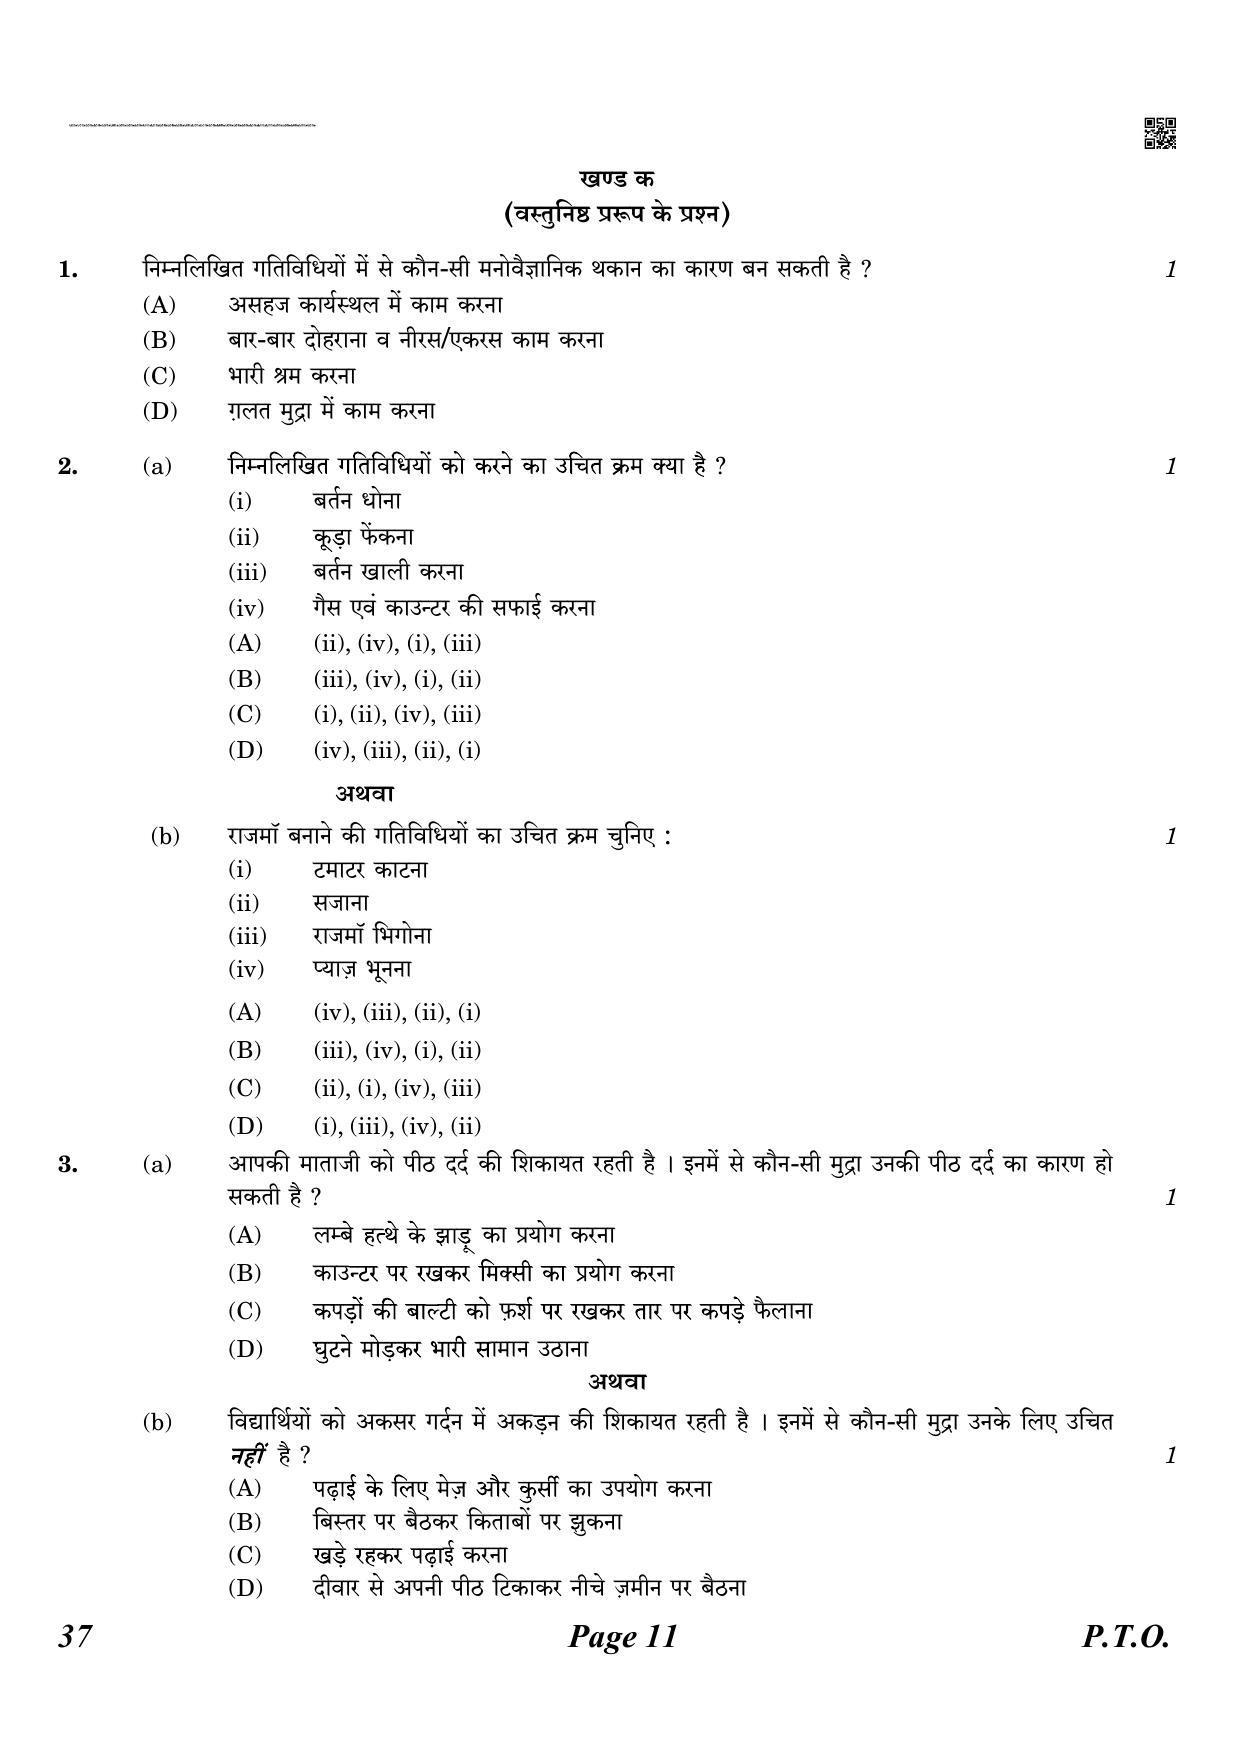 CBSE Class 10 QP_064_Home_Science 2021 Compartment Question Paper - Page 11